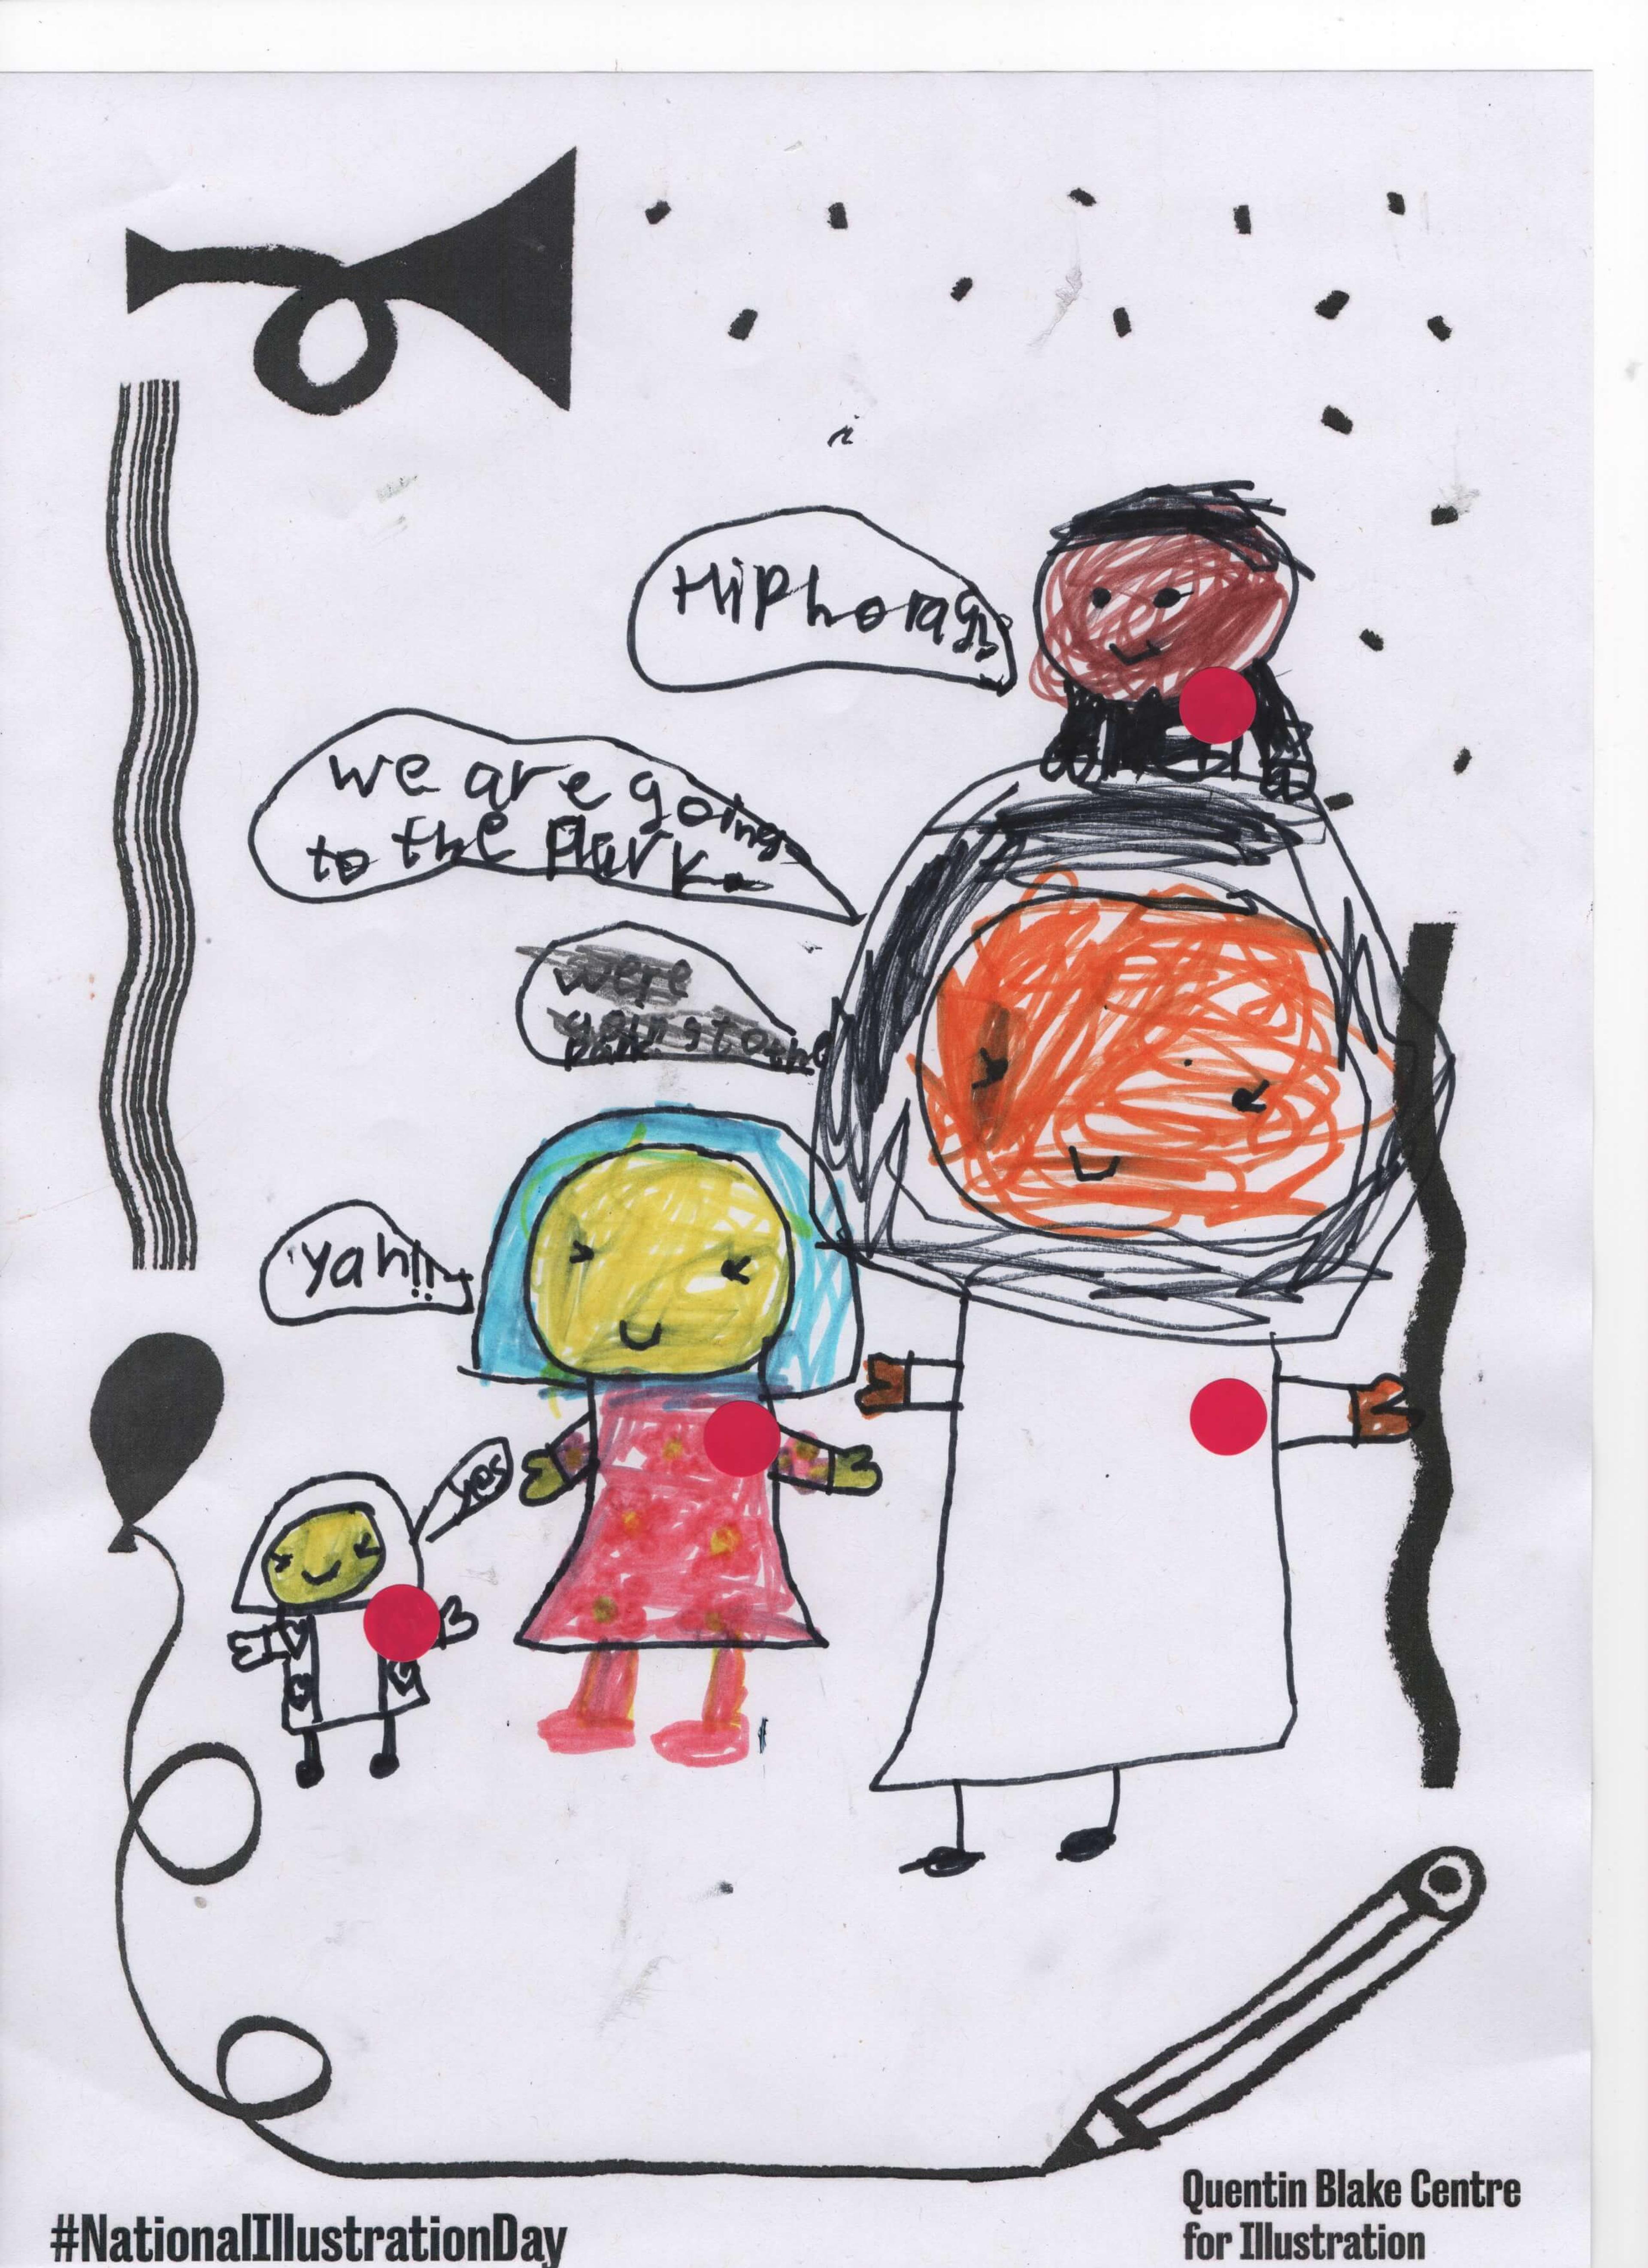 A joyful drawing of a smiling family of four. There are speech bubbles linked to each character, but the writing is difficult to decipher. 